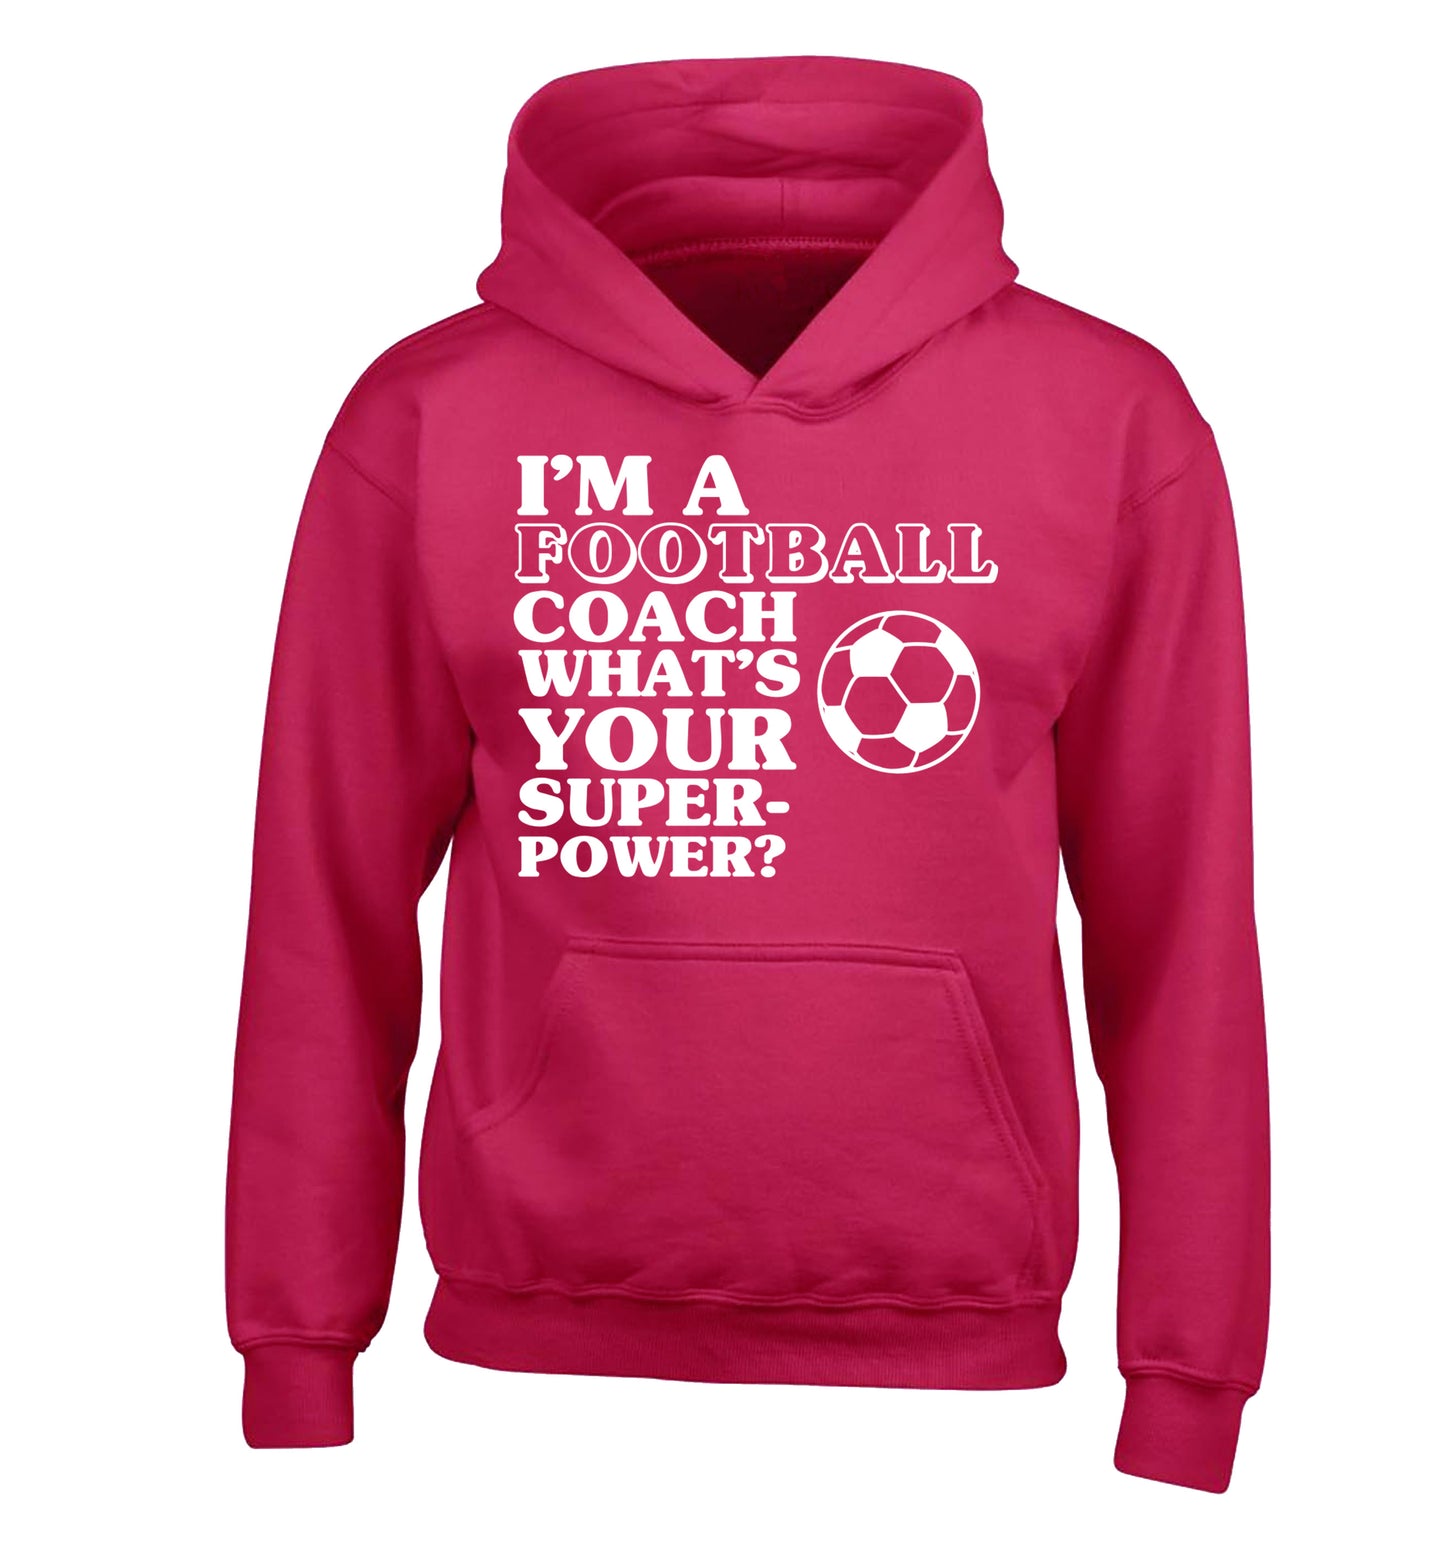 I'm a football coach what's your superpower? children's pink hoodie 12-14 Years